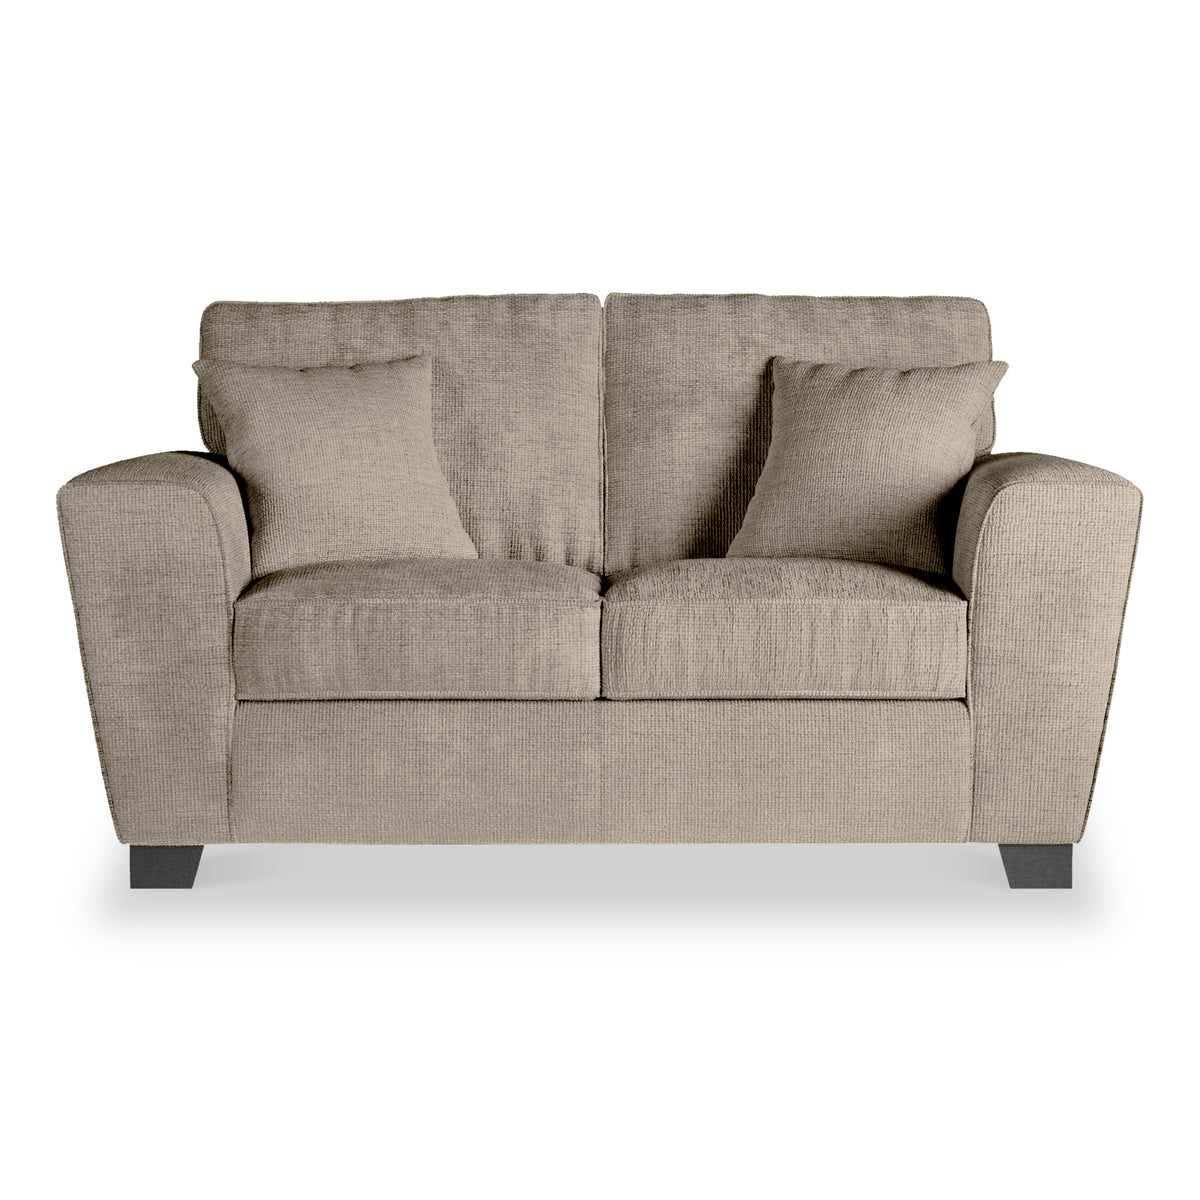 Chester Mocha Hopsack 2 Seater couch